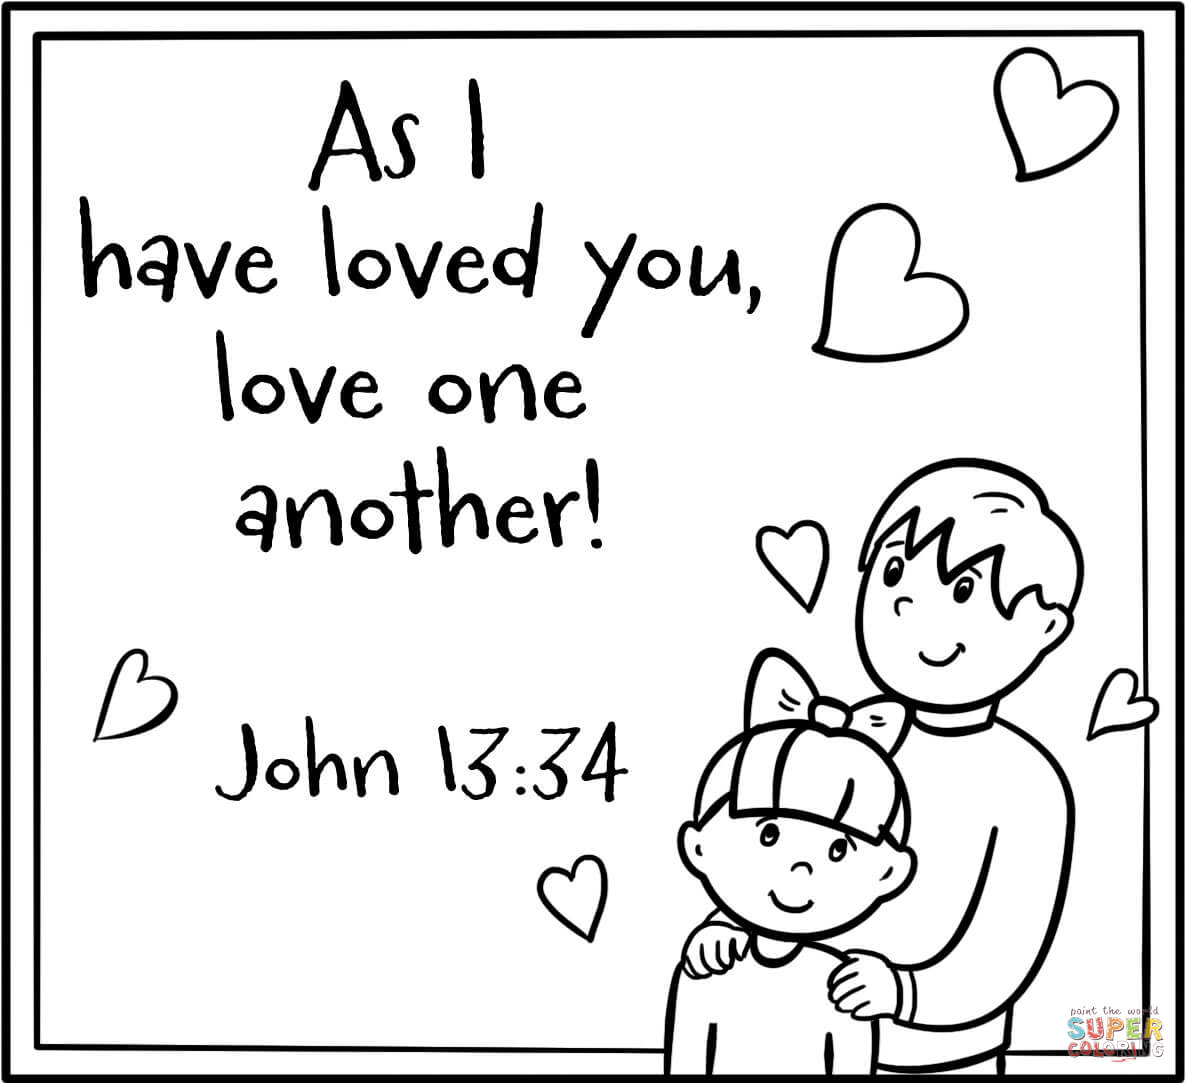 As i have loved you love one another